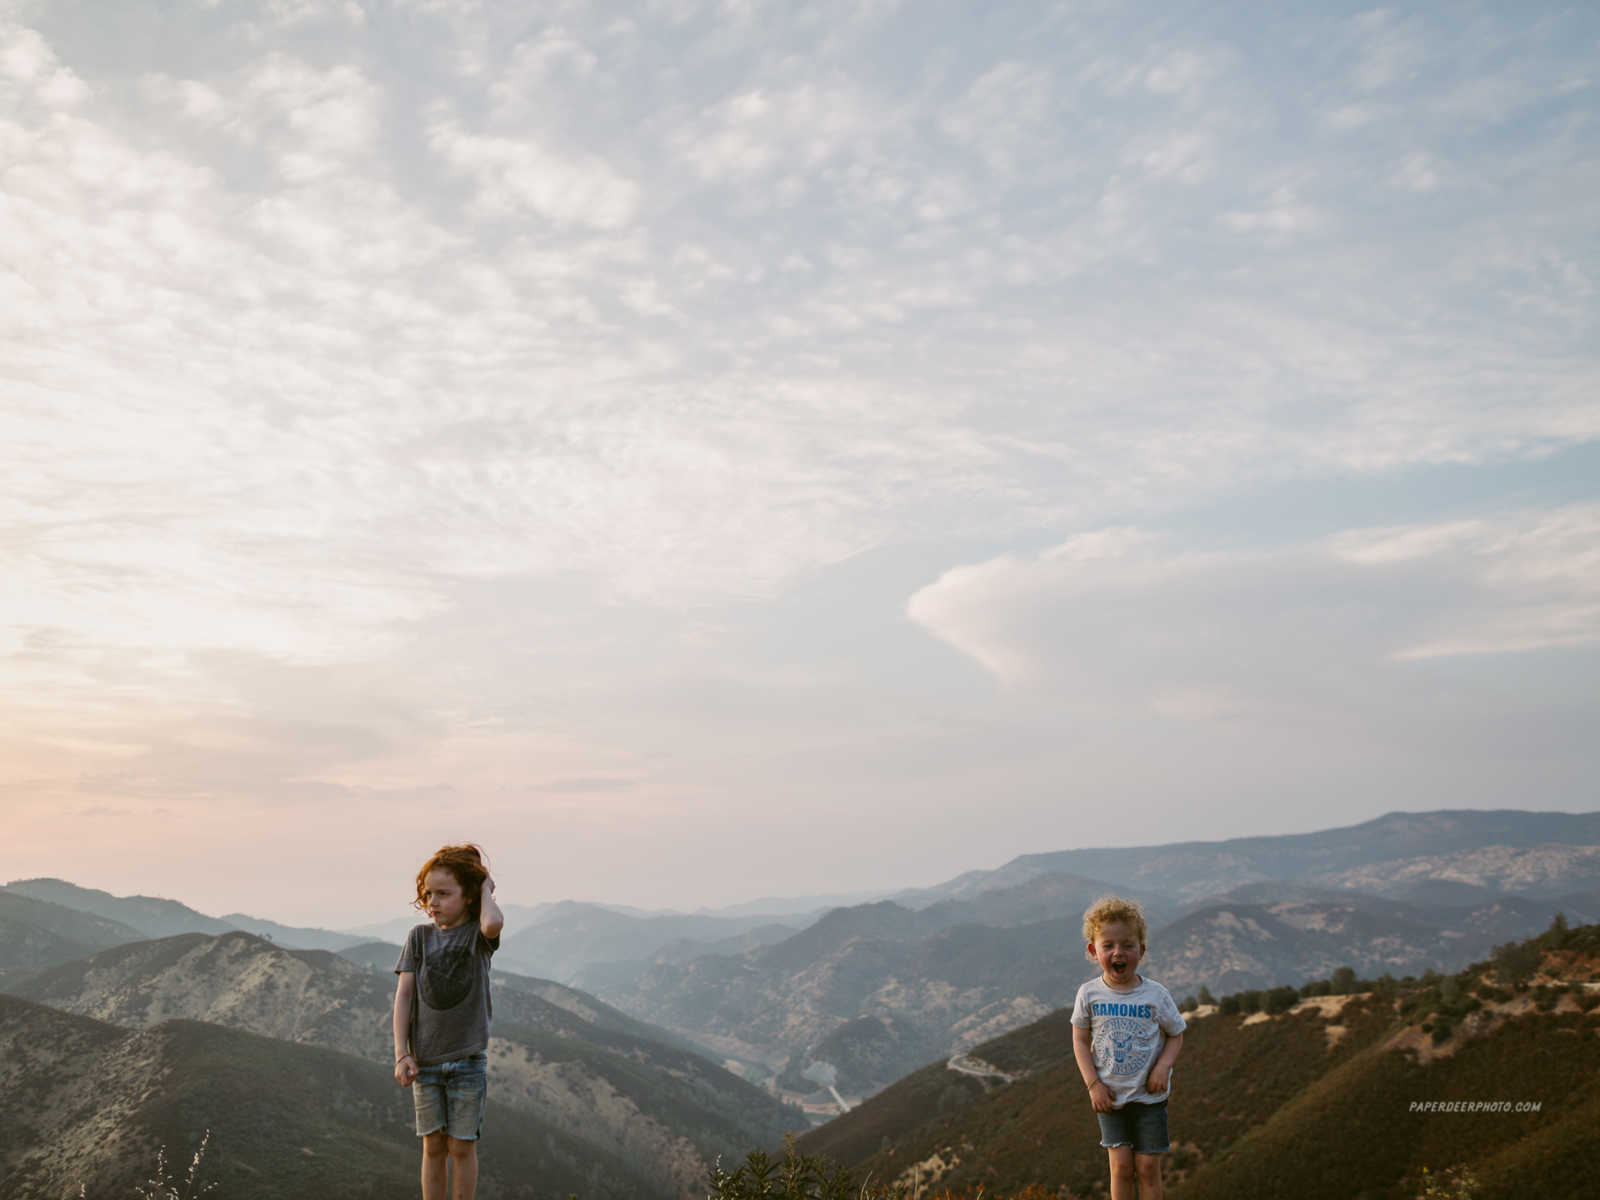 Young boy who has had two heart surgeries stands next to older brother in front of scenic view of mountains